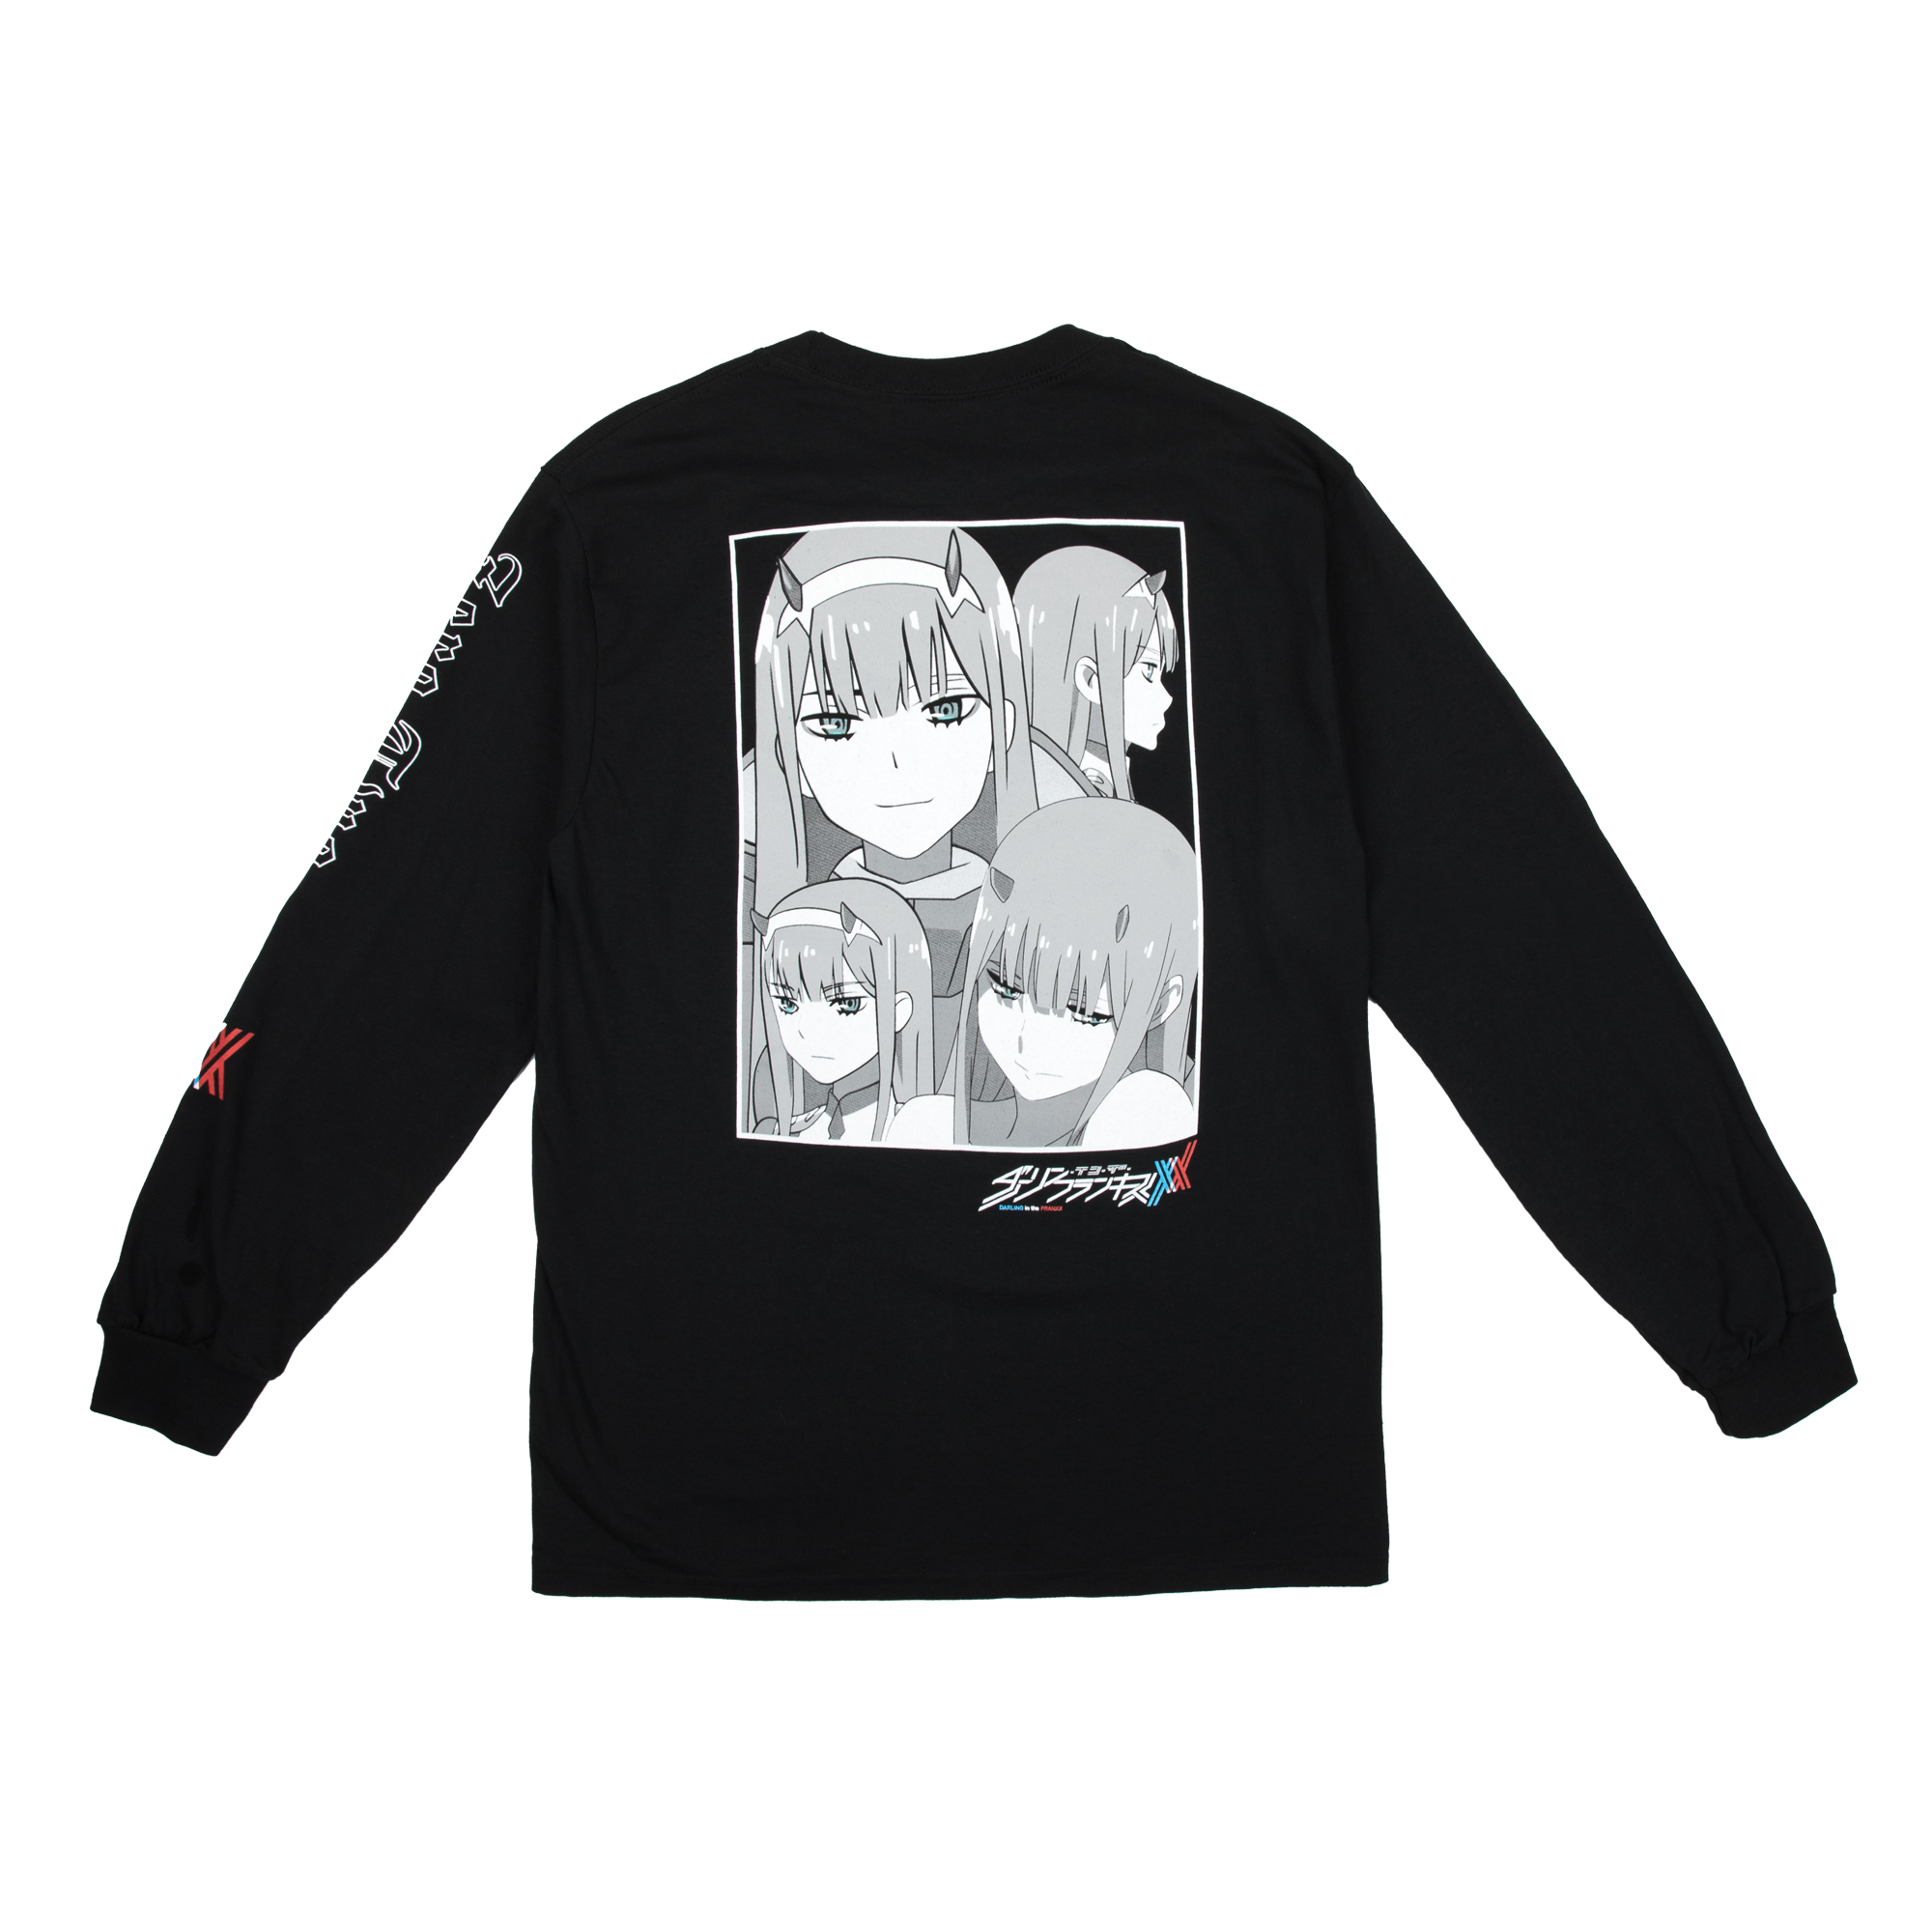 DARLING in the FRANXX - Zero Two Faces Long Sleeve - Crunchyroll Exclusive! image count 2